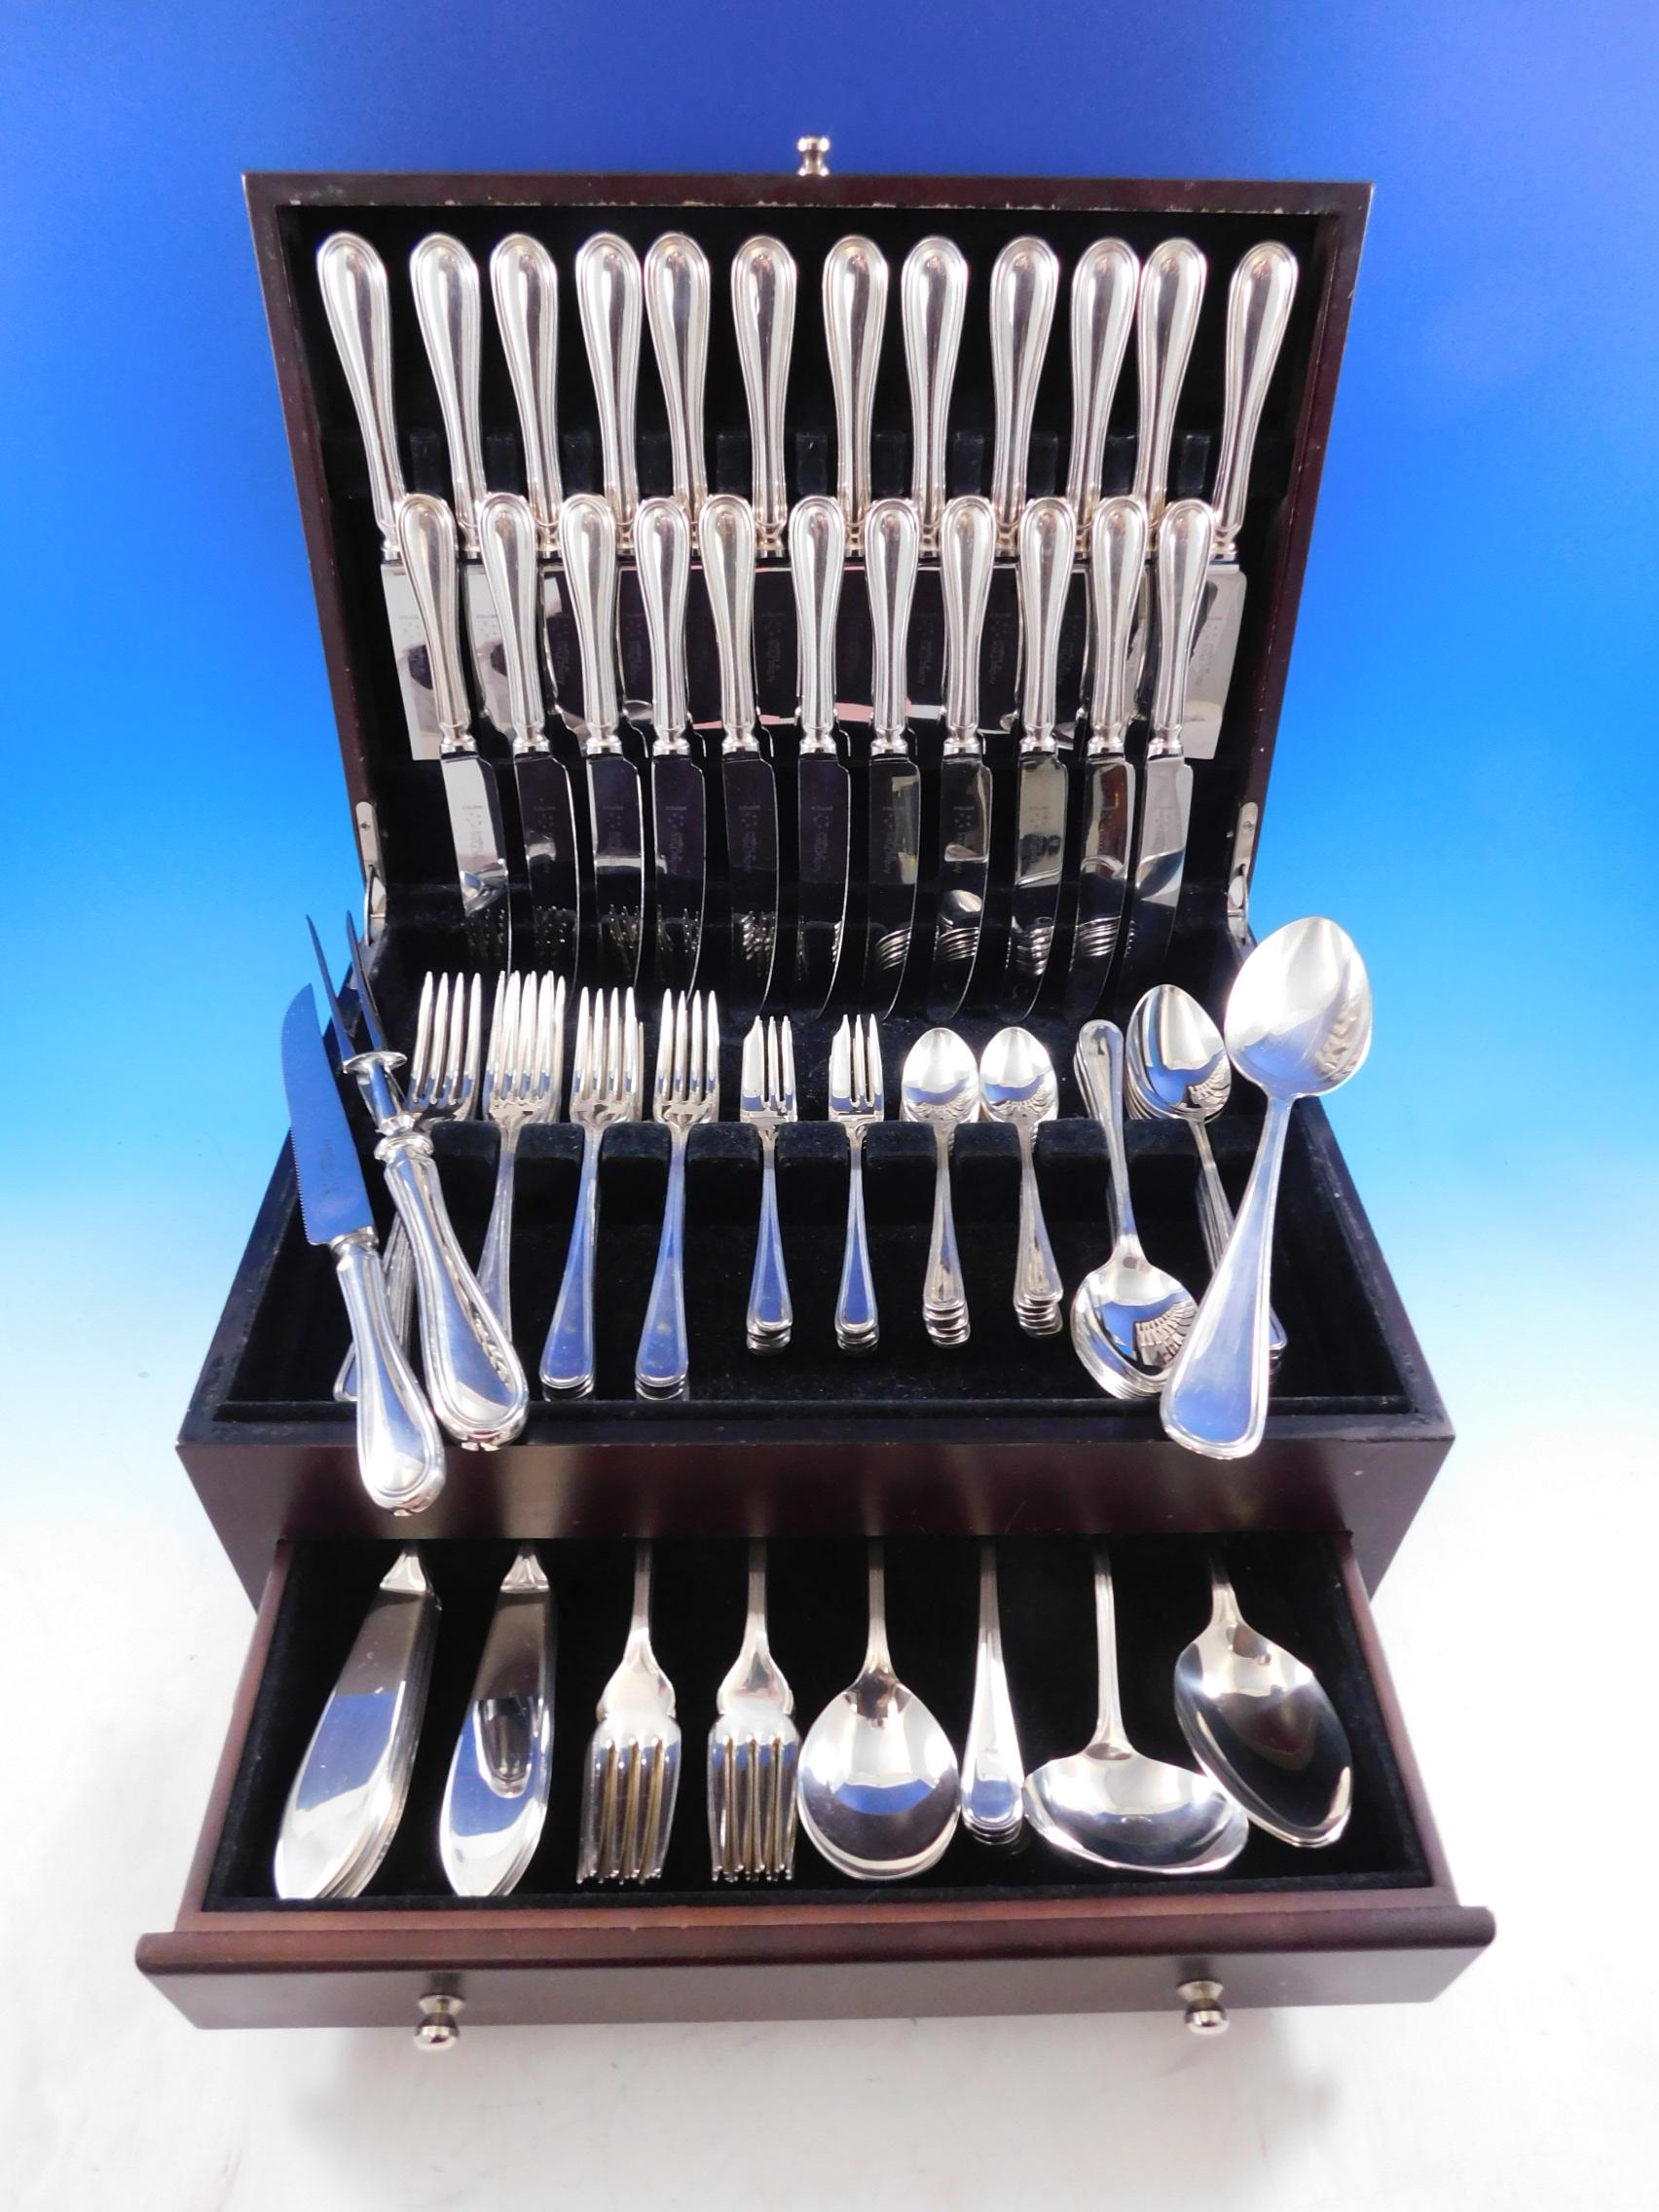 Arthur Price is the UK's most desired cutlery brand with a reputation for unparalleled quality, craftsmanship and design since 1902.

Outstanding monumental Brittania by Arthur Price Silverplated Flatware set, 122 pieces. This set includes:

12